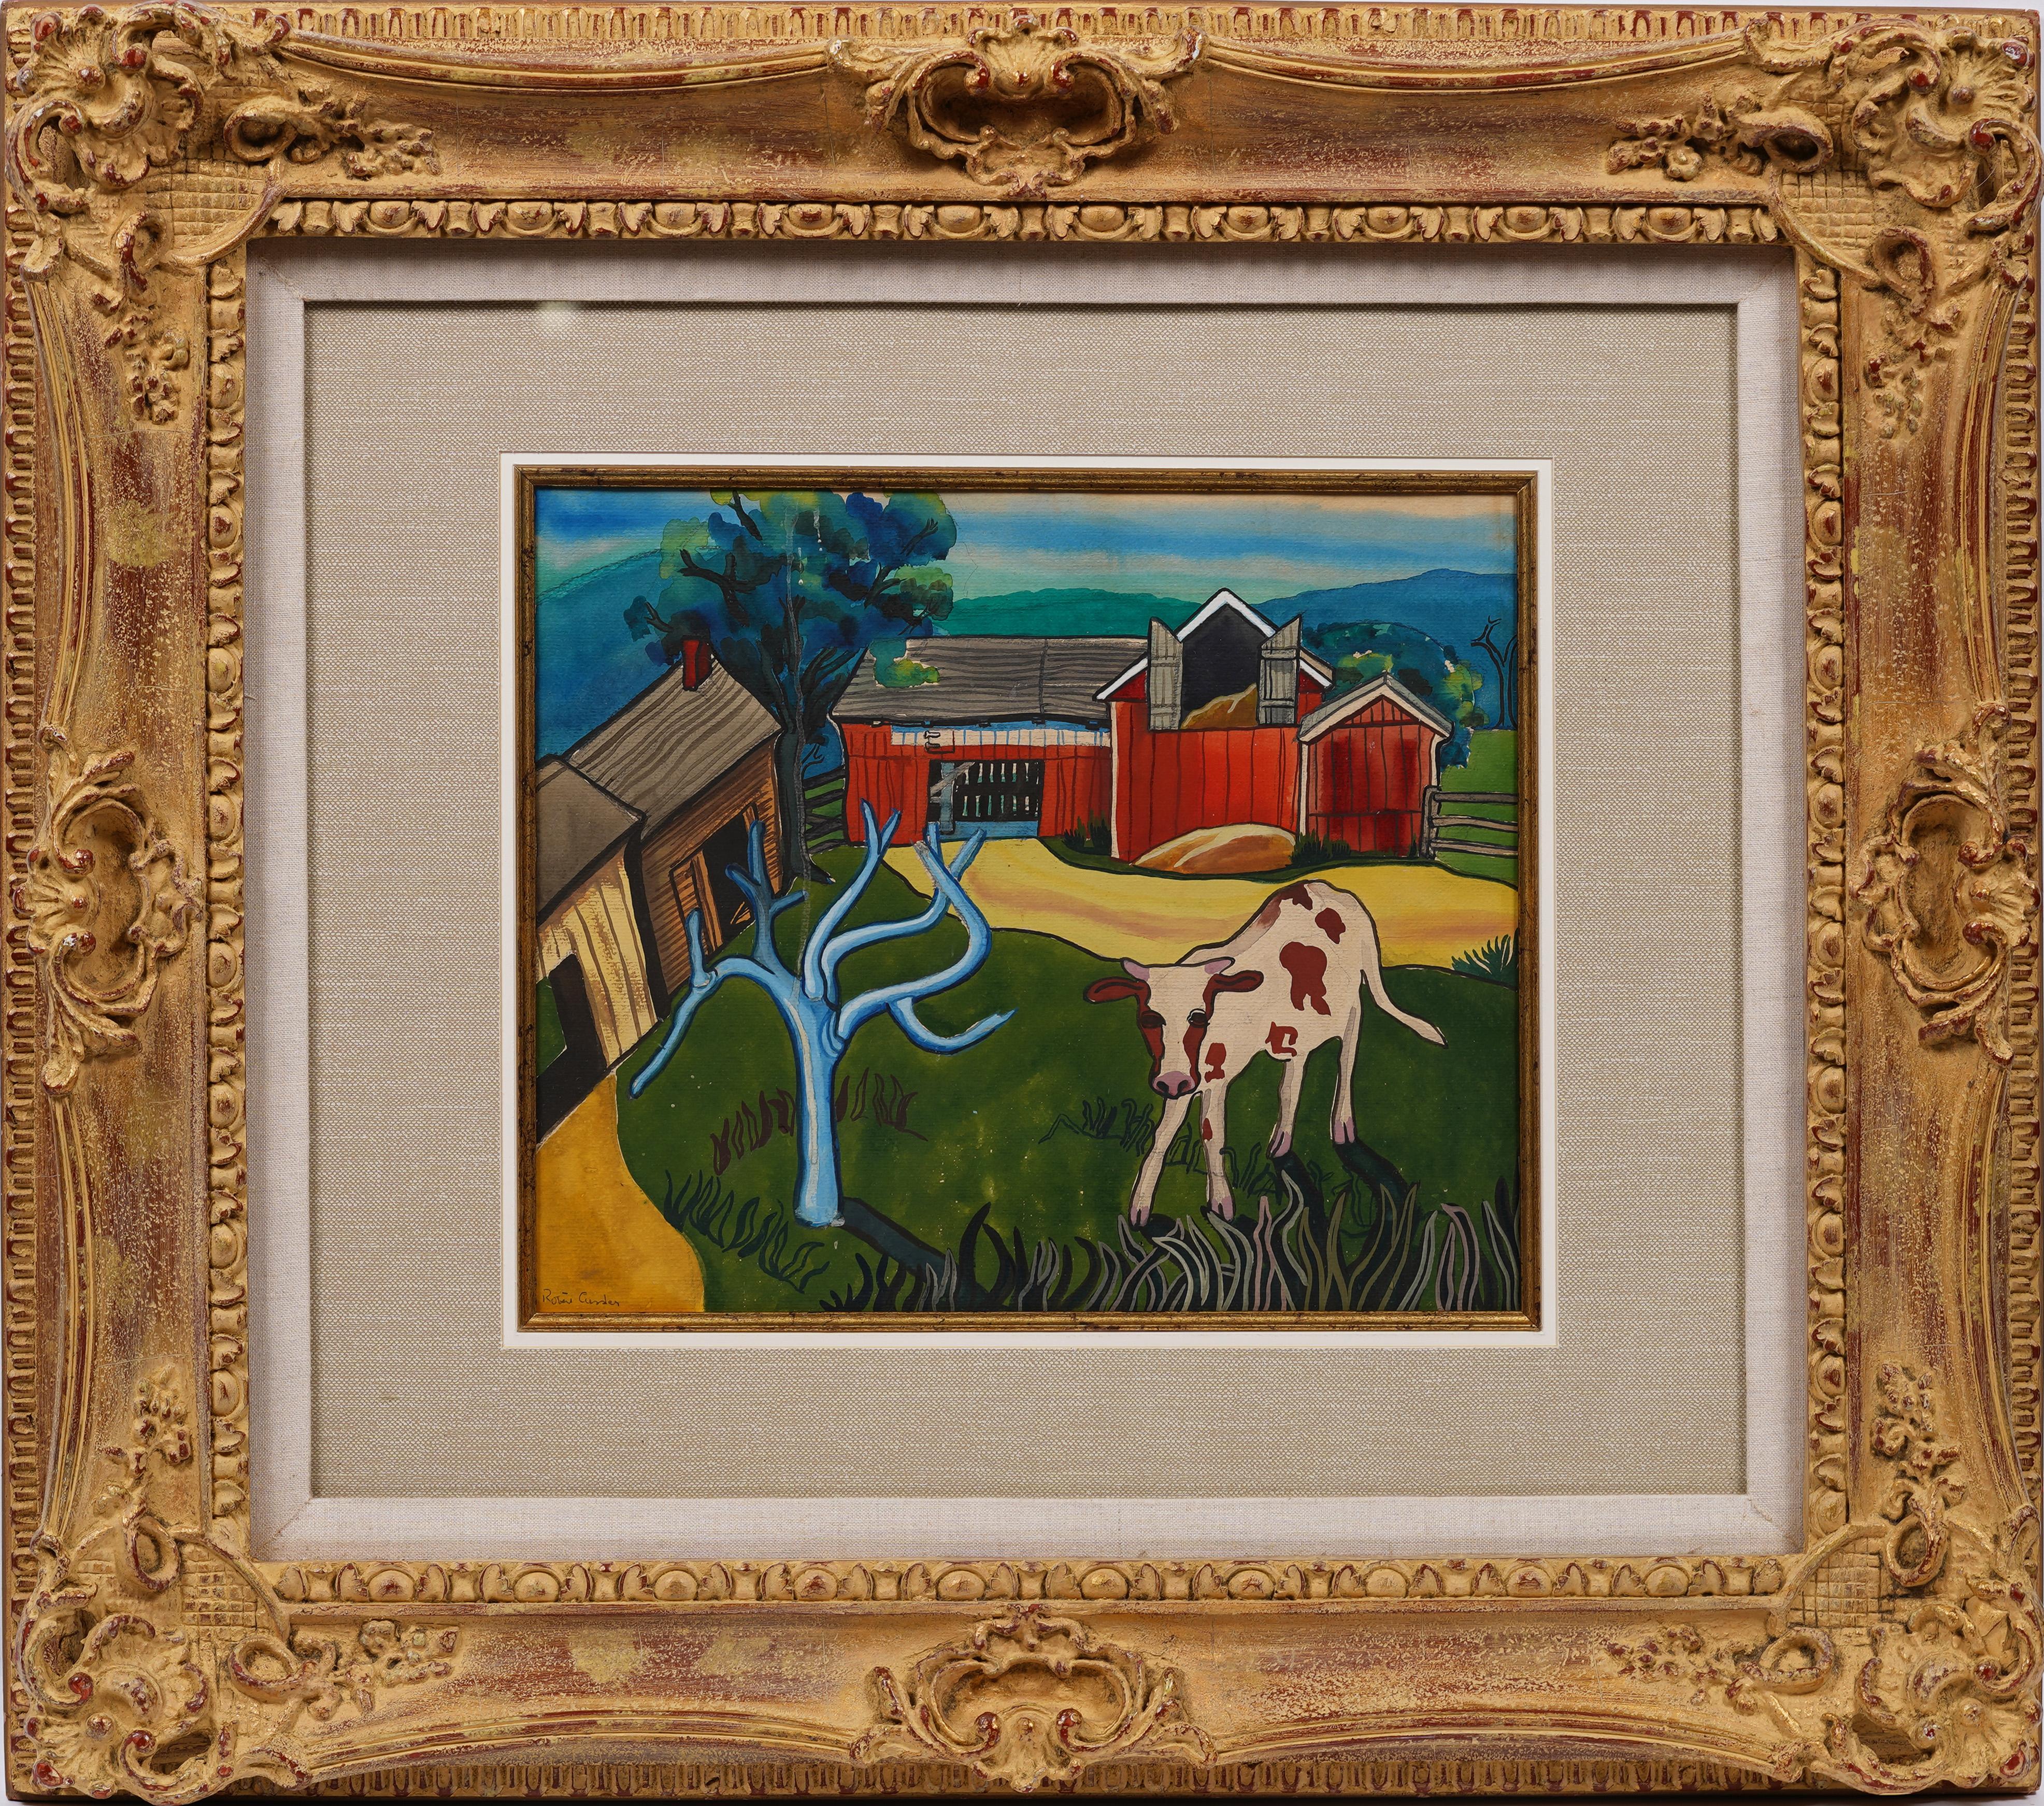 Antique American modernist regional cow farm landscape.   Really nicely framed and a very impressive painting in person.  Signed illegibly.  